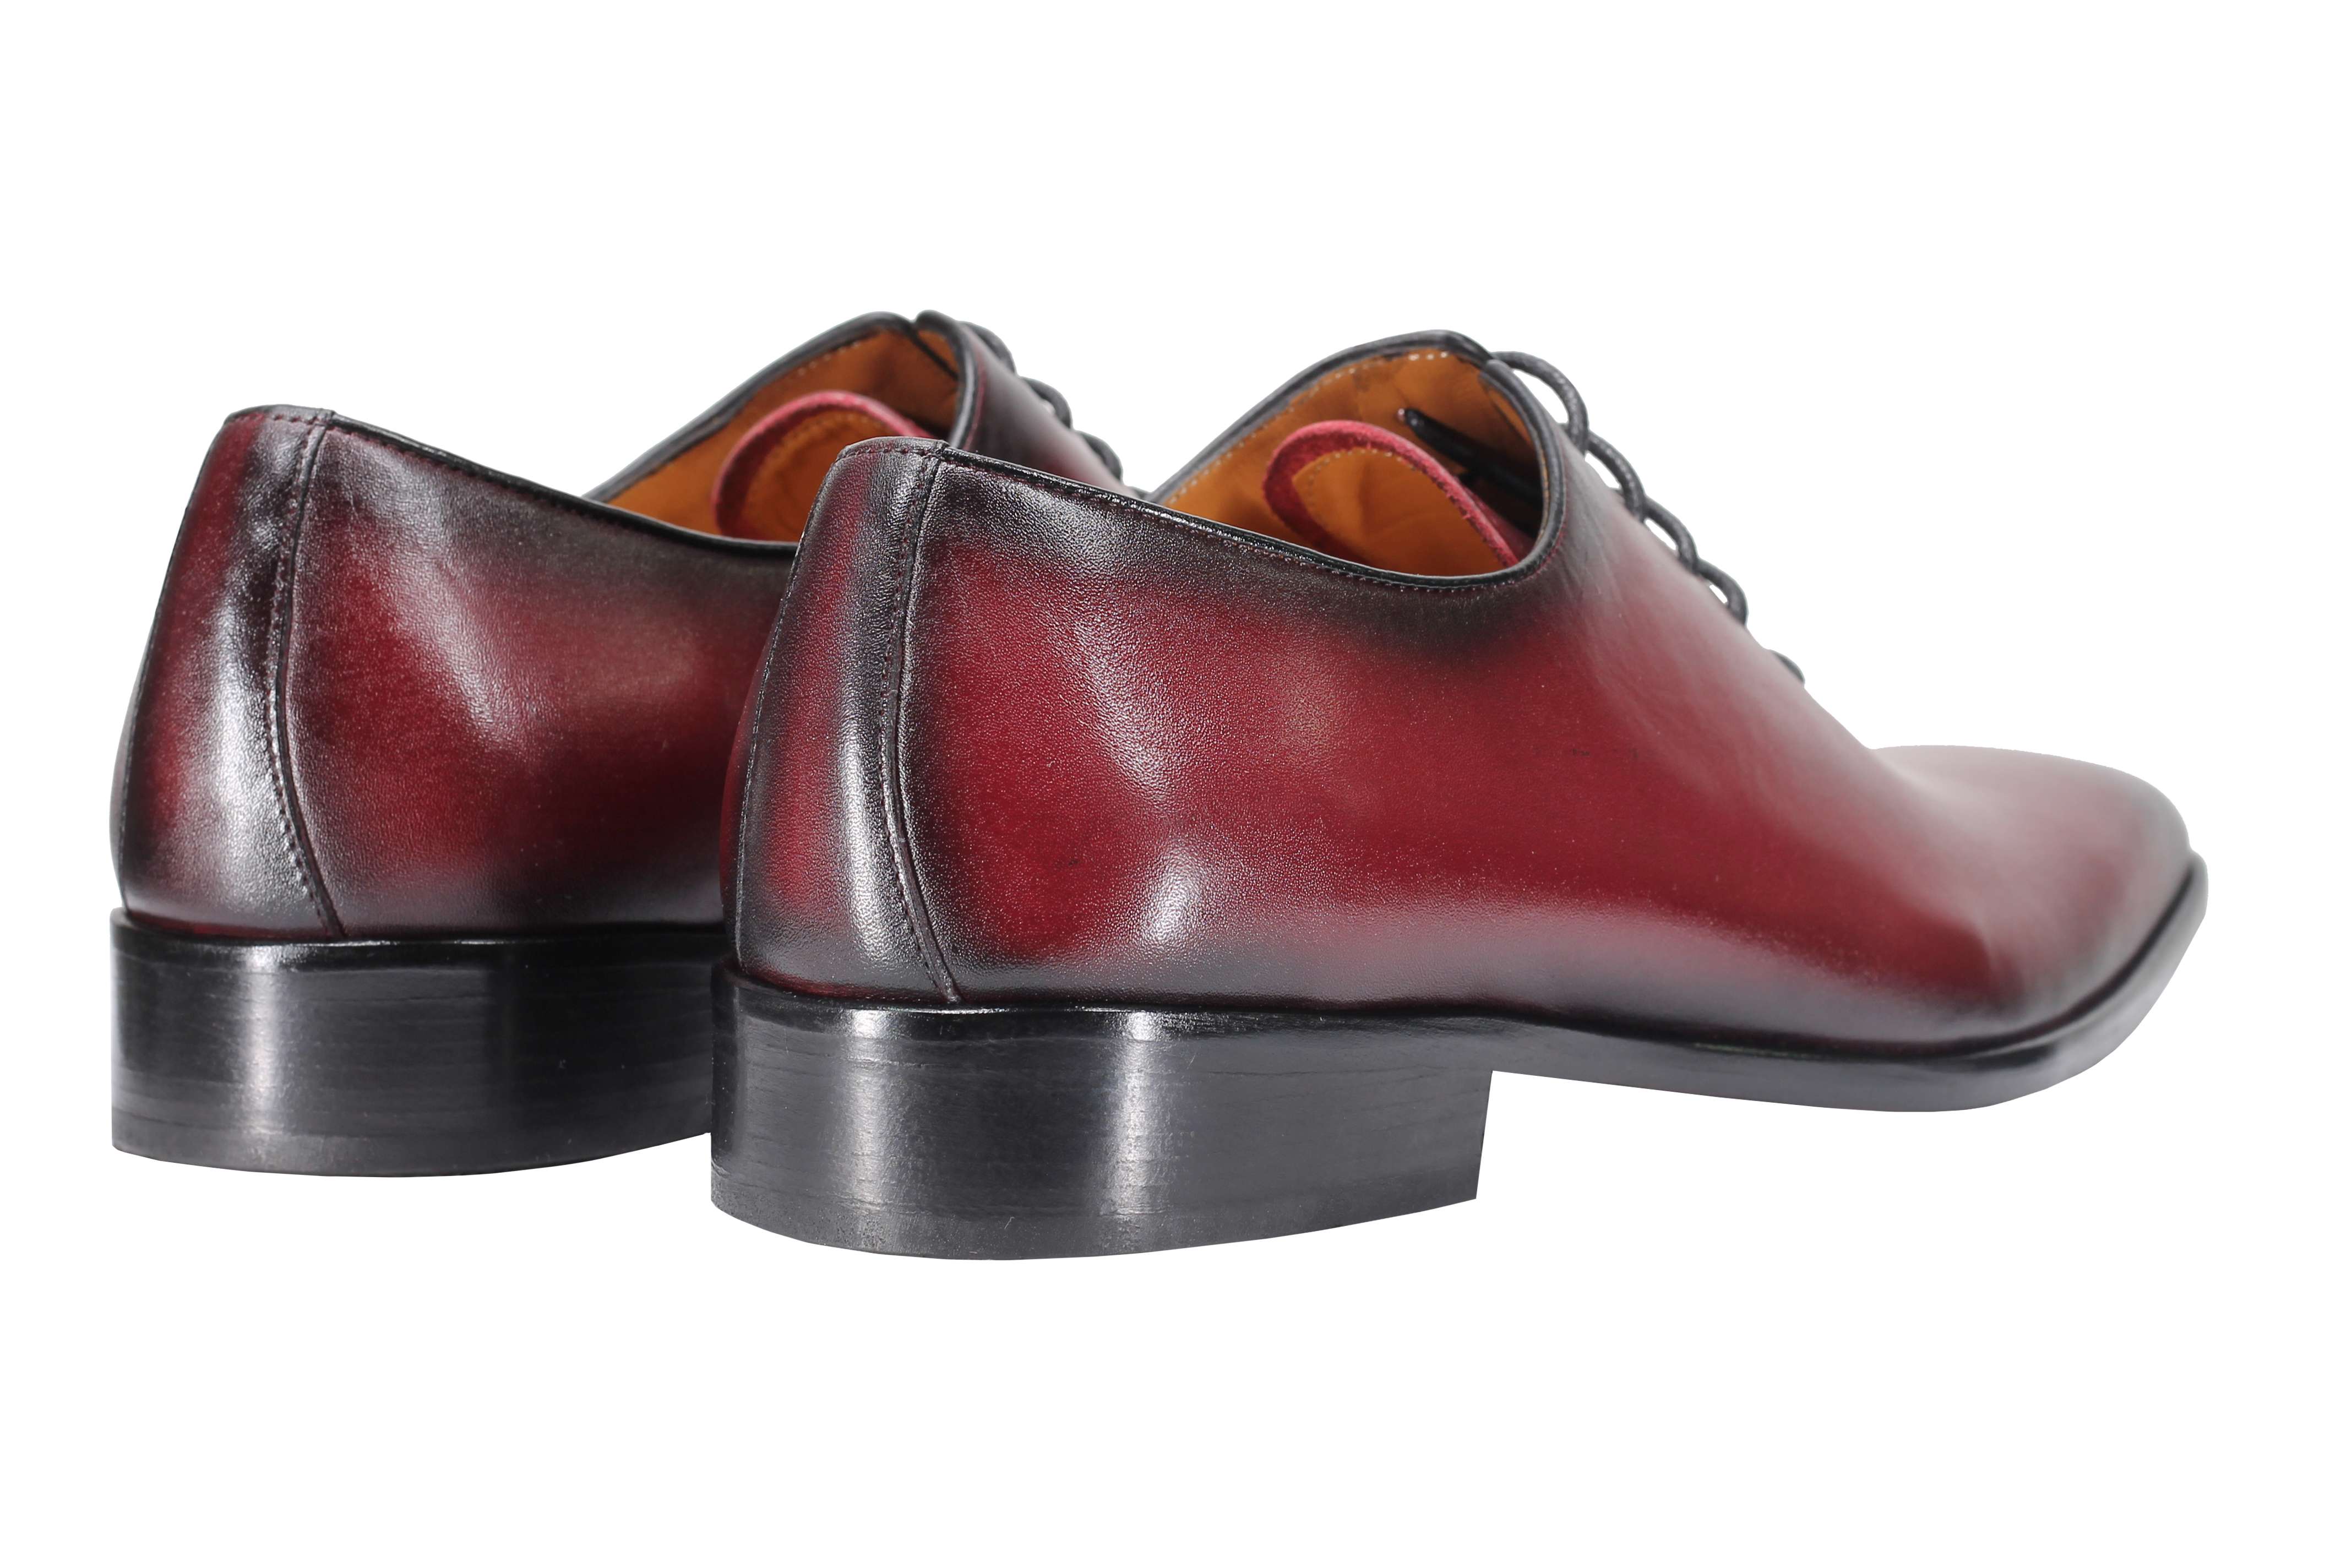 MAROON CALF LEATHER WHOLECUT OXFORD LACE UP SHOES